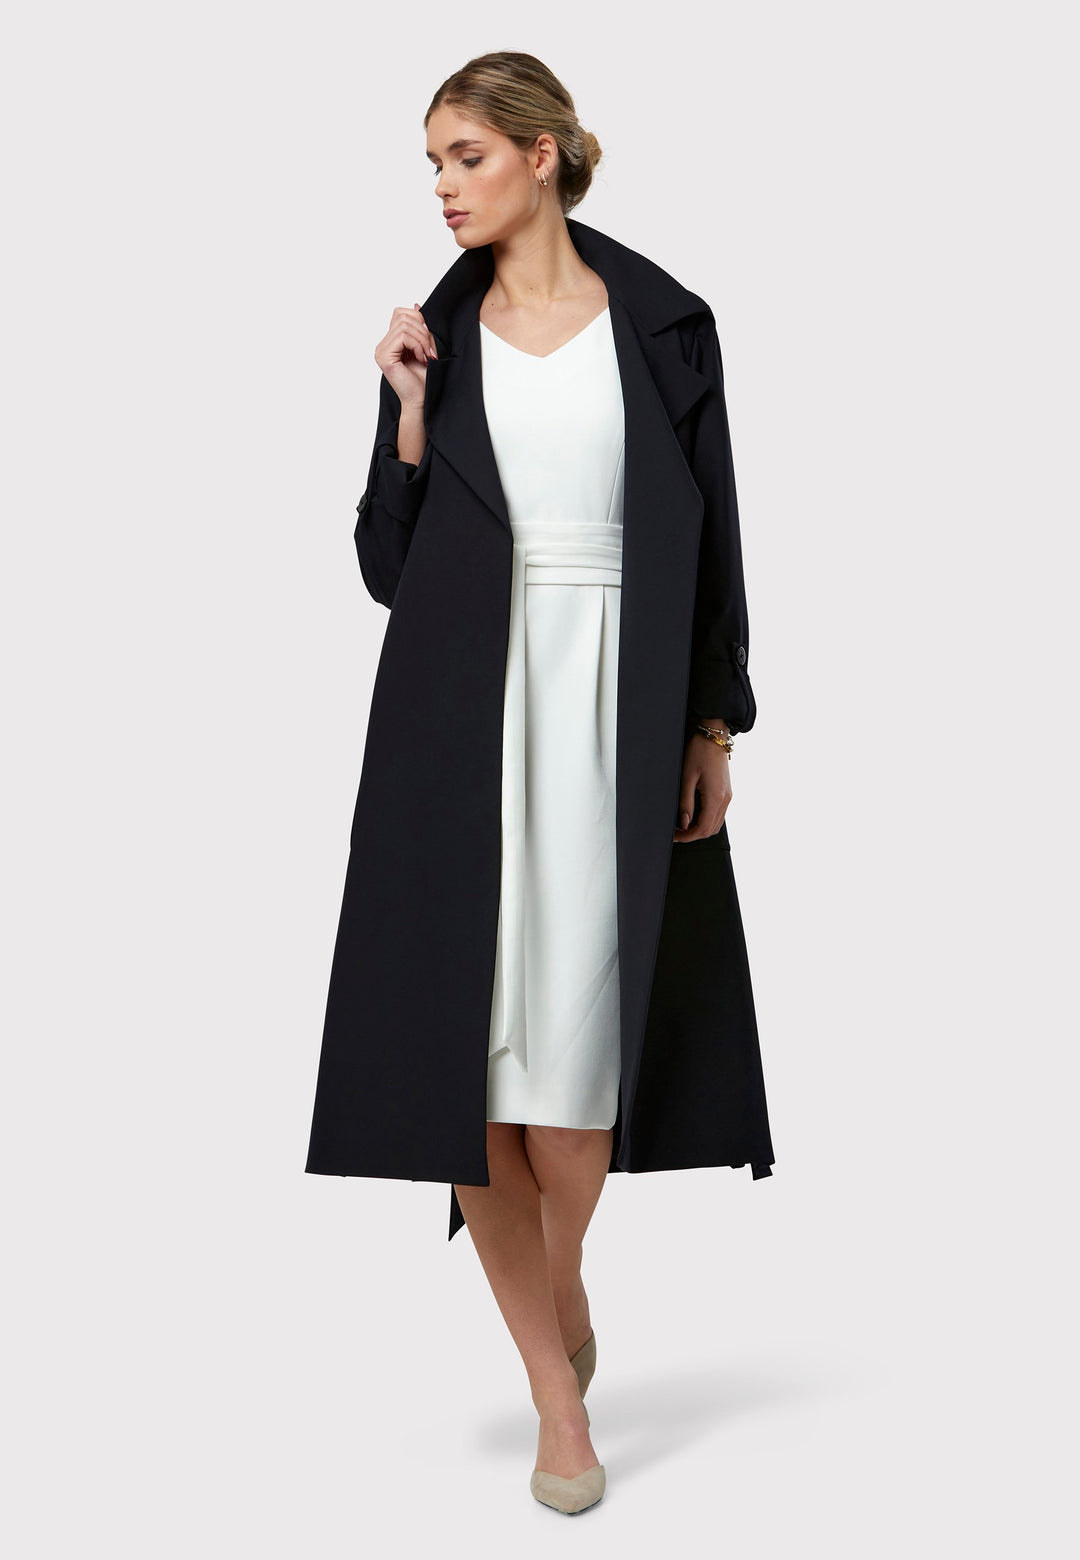 Lydiah is a timeless dark navy trench coat with a fluid design. Its detachable, row-stitched belt offers flexibility to cinch at the waist or wear it open for a relaxed style. Patch pockets combine both fashion and function, while the clean edge finish maintains a sleek, button-free look. Side slits add a contemporary touch and ensure ease of movement.